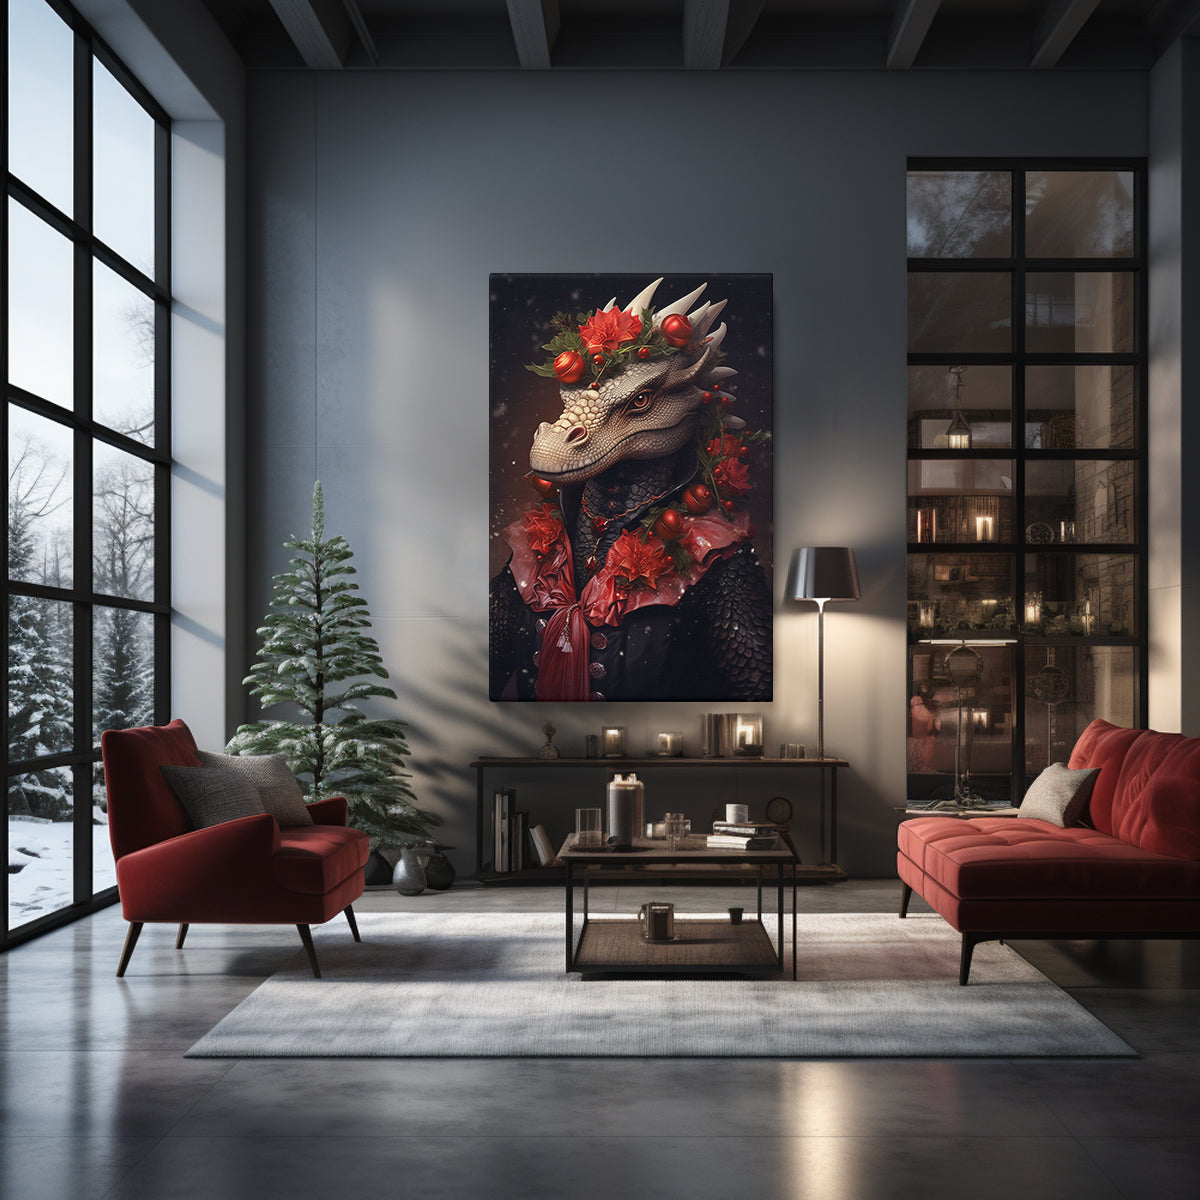 Festive Dragon Portrait, Holiday Fantasy Decor, Mythical Beast Ideal Gift for Fantasy Lovers Abstract Art Print Artesty 1 Panel 16"x24" 